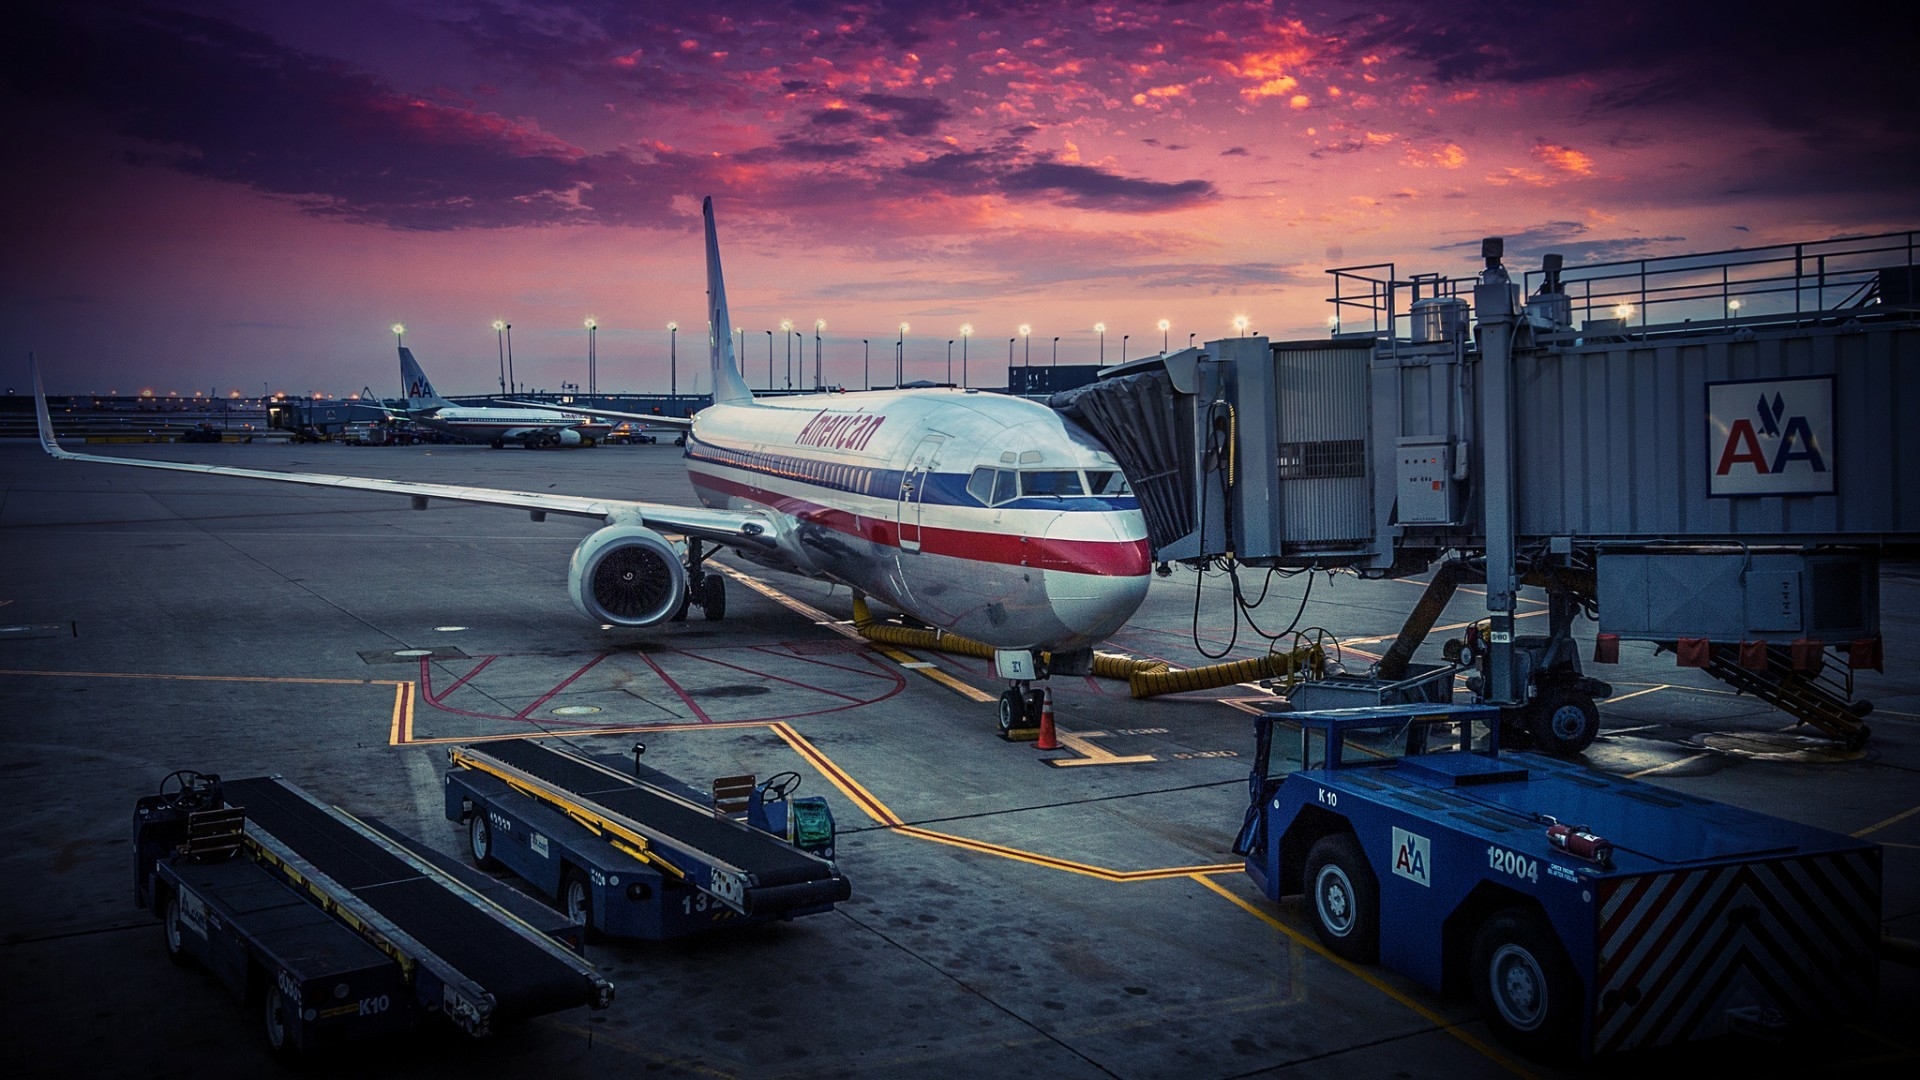 American Airlines Landed for 1920 x 1080 HDTV 1080p resolution